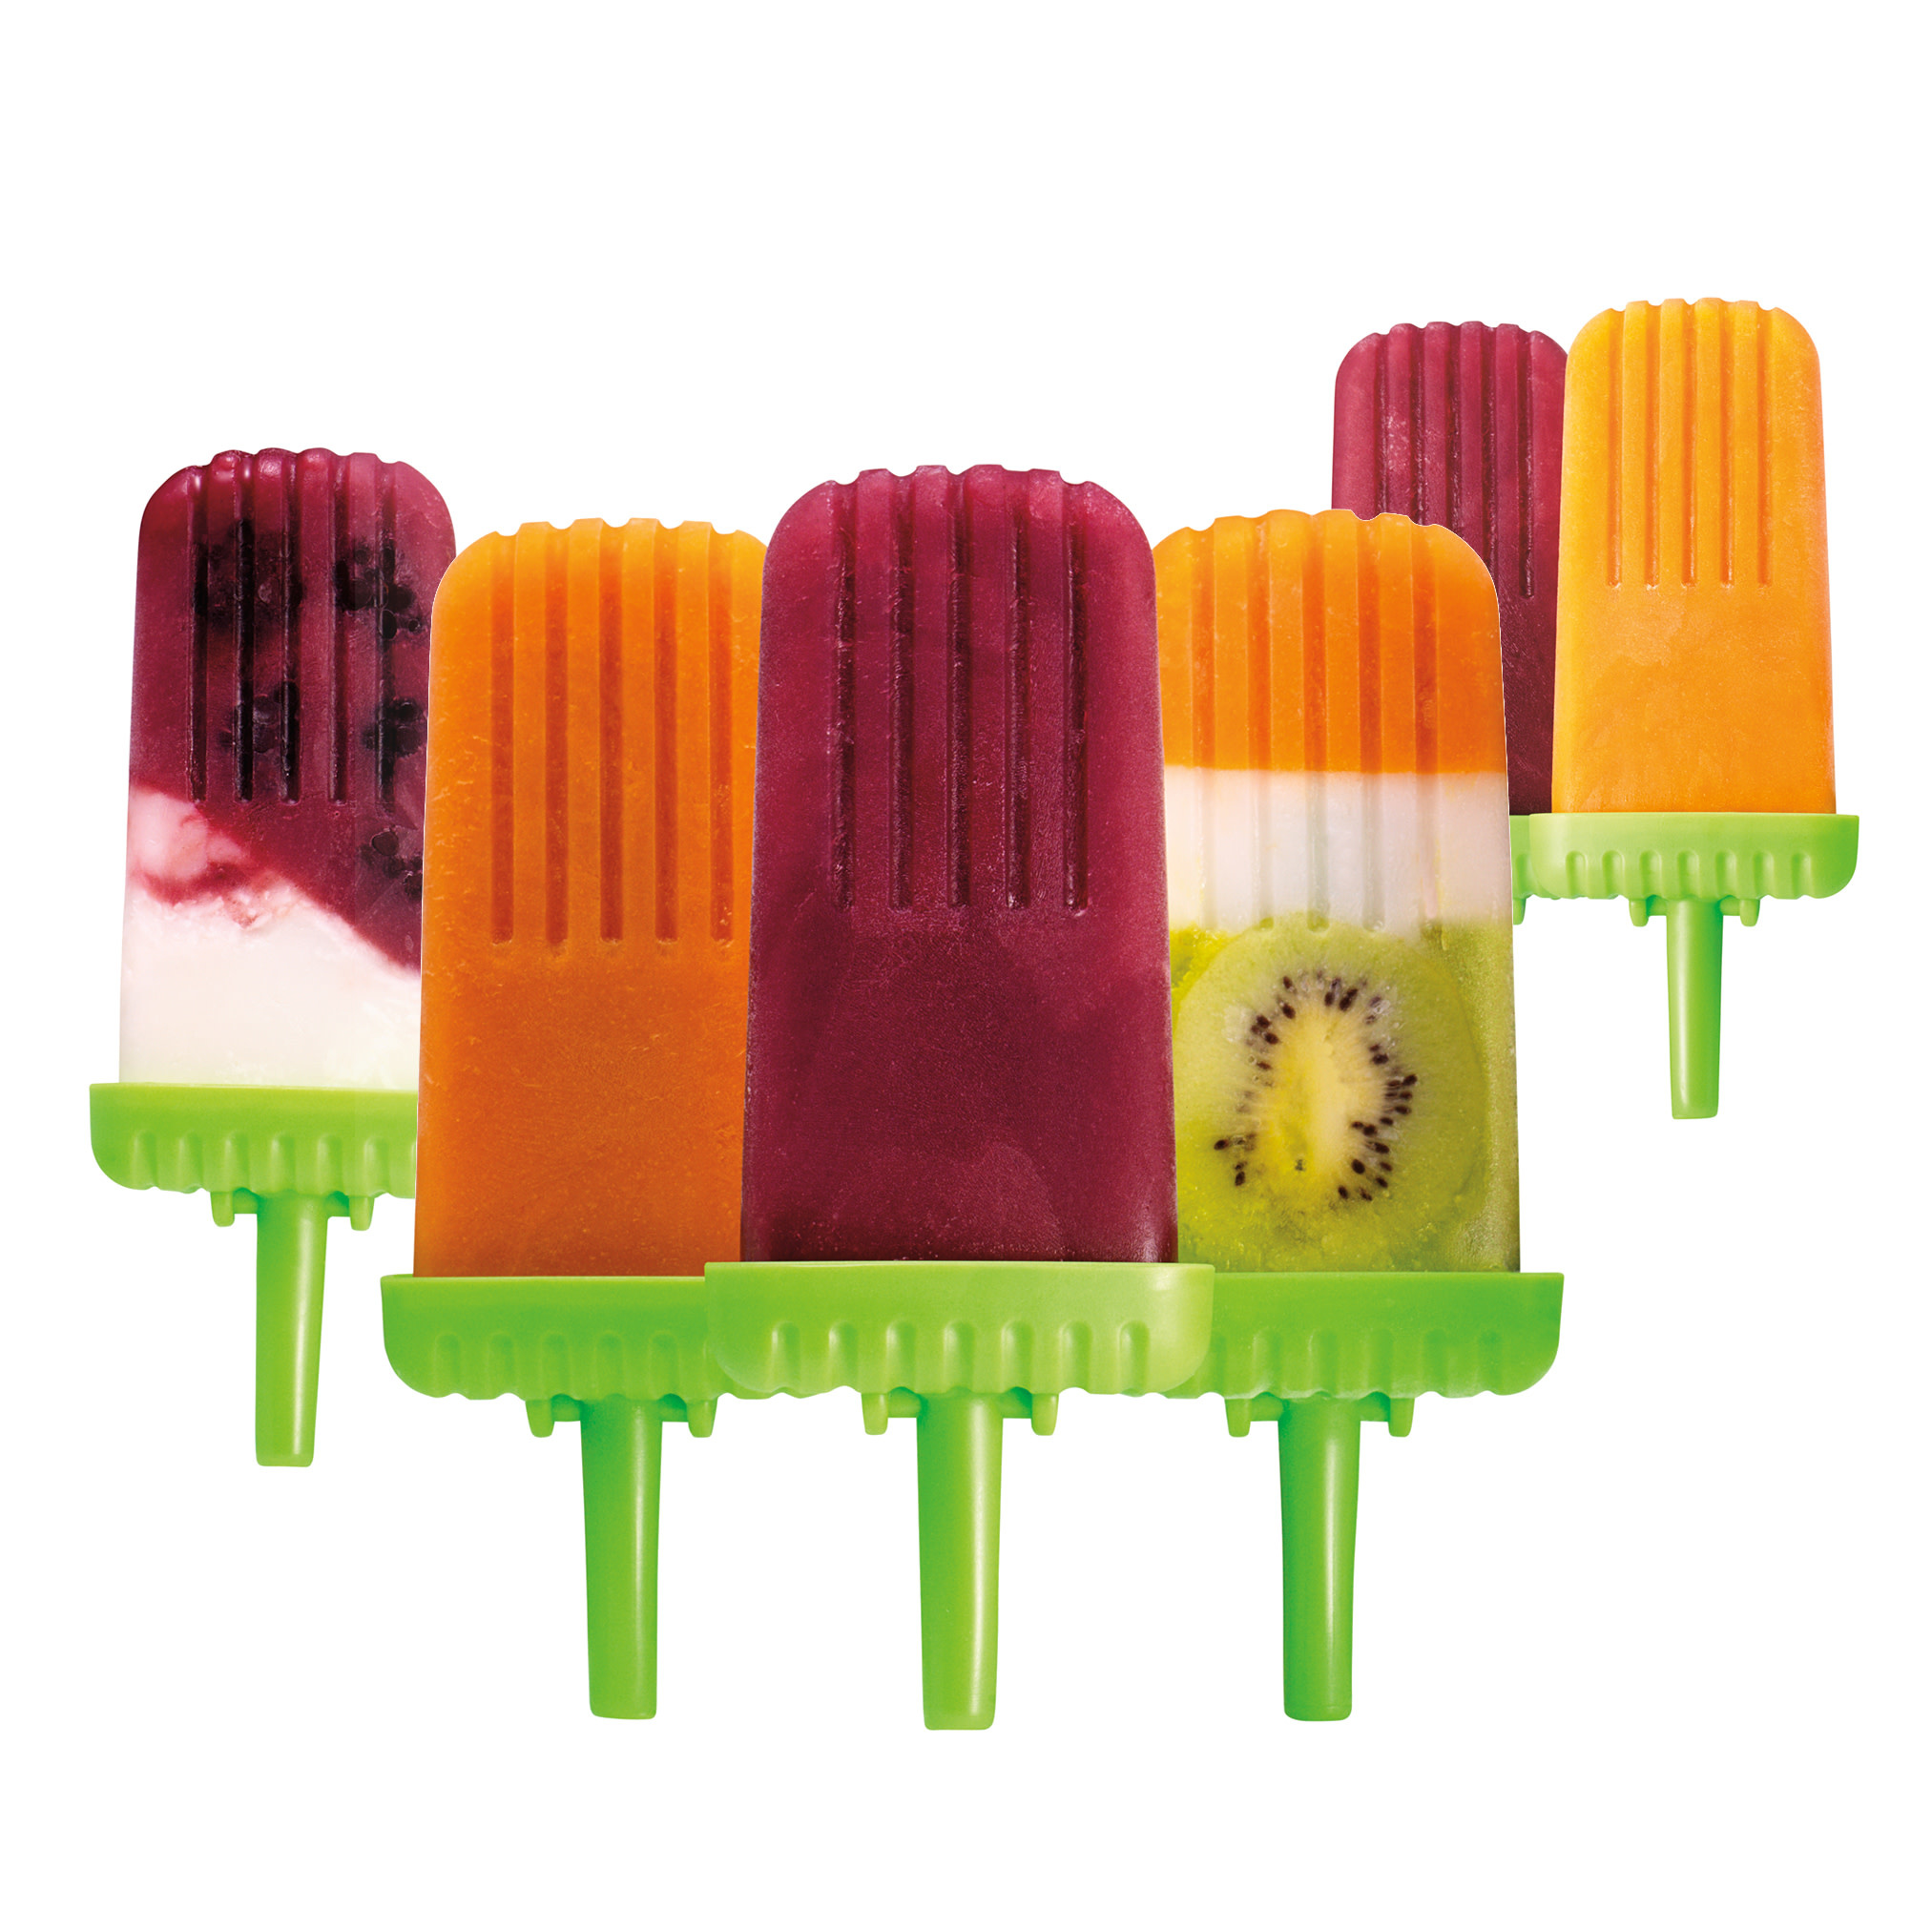 Tovolo Groovy Popsicle Mold Review 